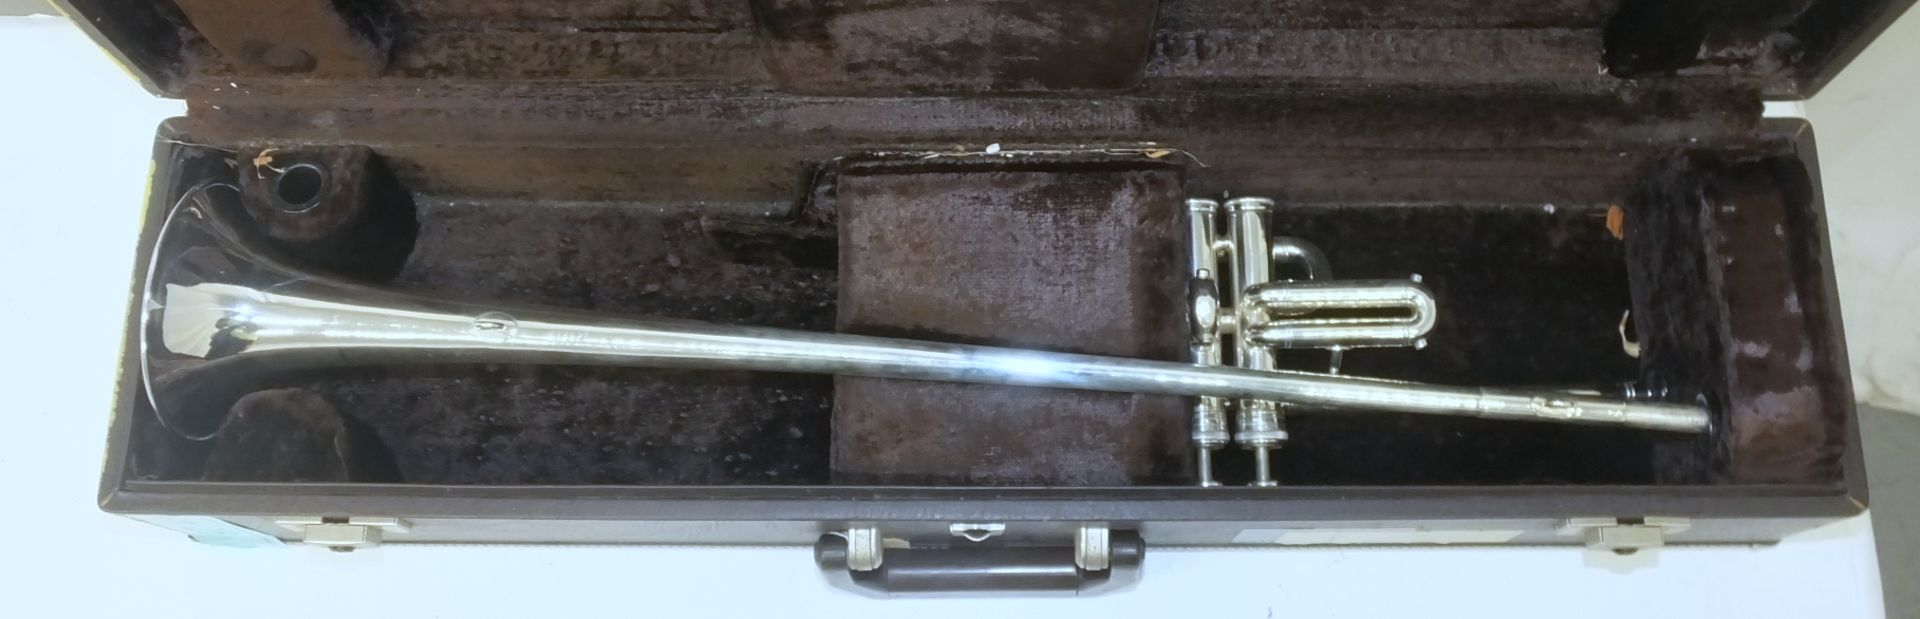 Boosey & Hawkes Fanfare Trumpet in Besson case - Serial Numbers in description. - Image 2 of 10